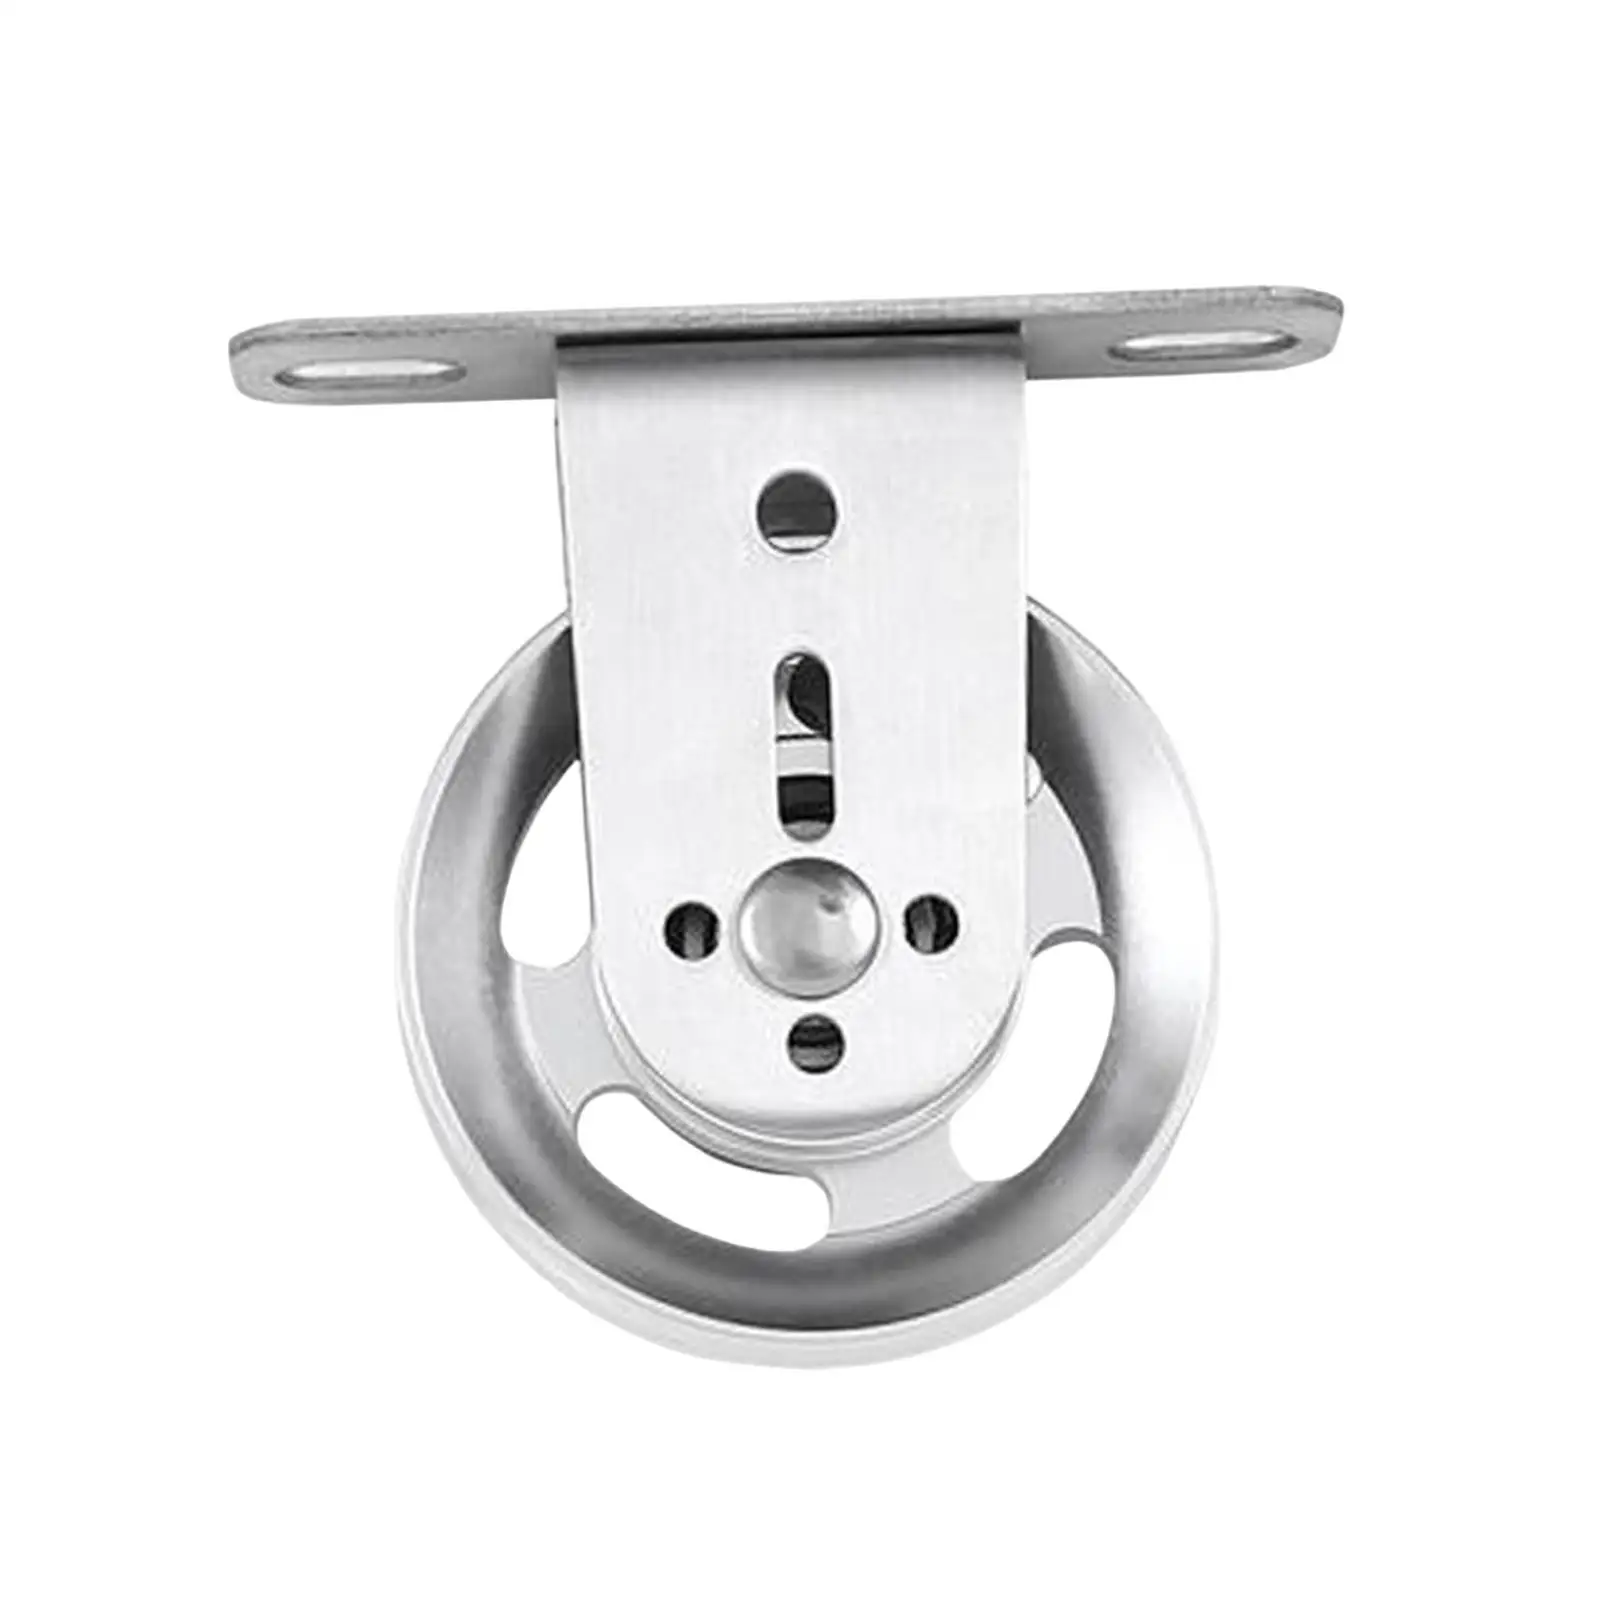 Pulley Wheel Durable Stainless Steel Sturdy Silent Lifting Pulley System for Cable Machines Gym Wire Rope Crane Traction Fitness